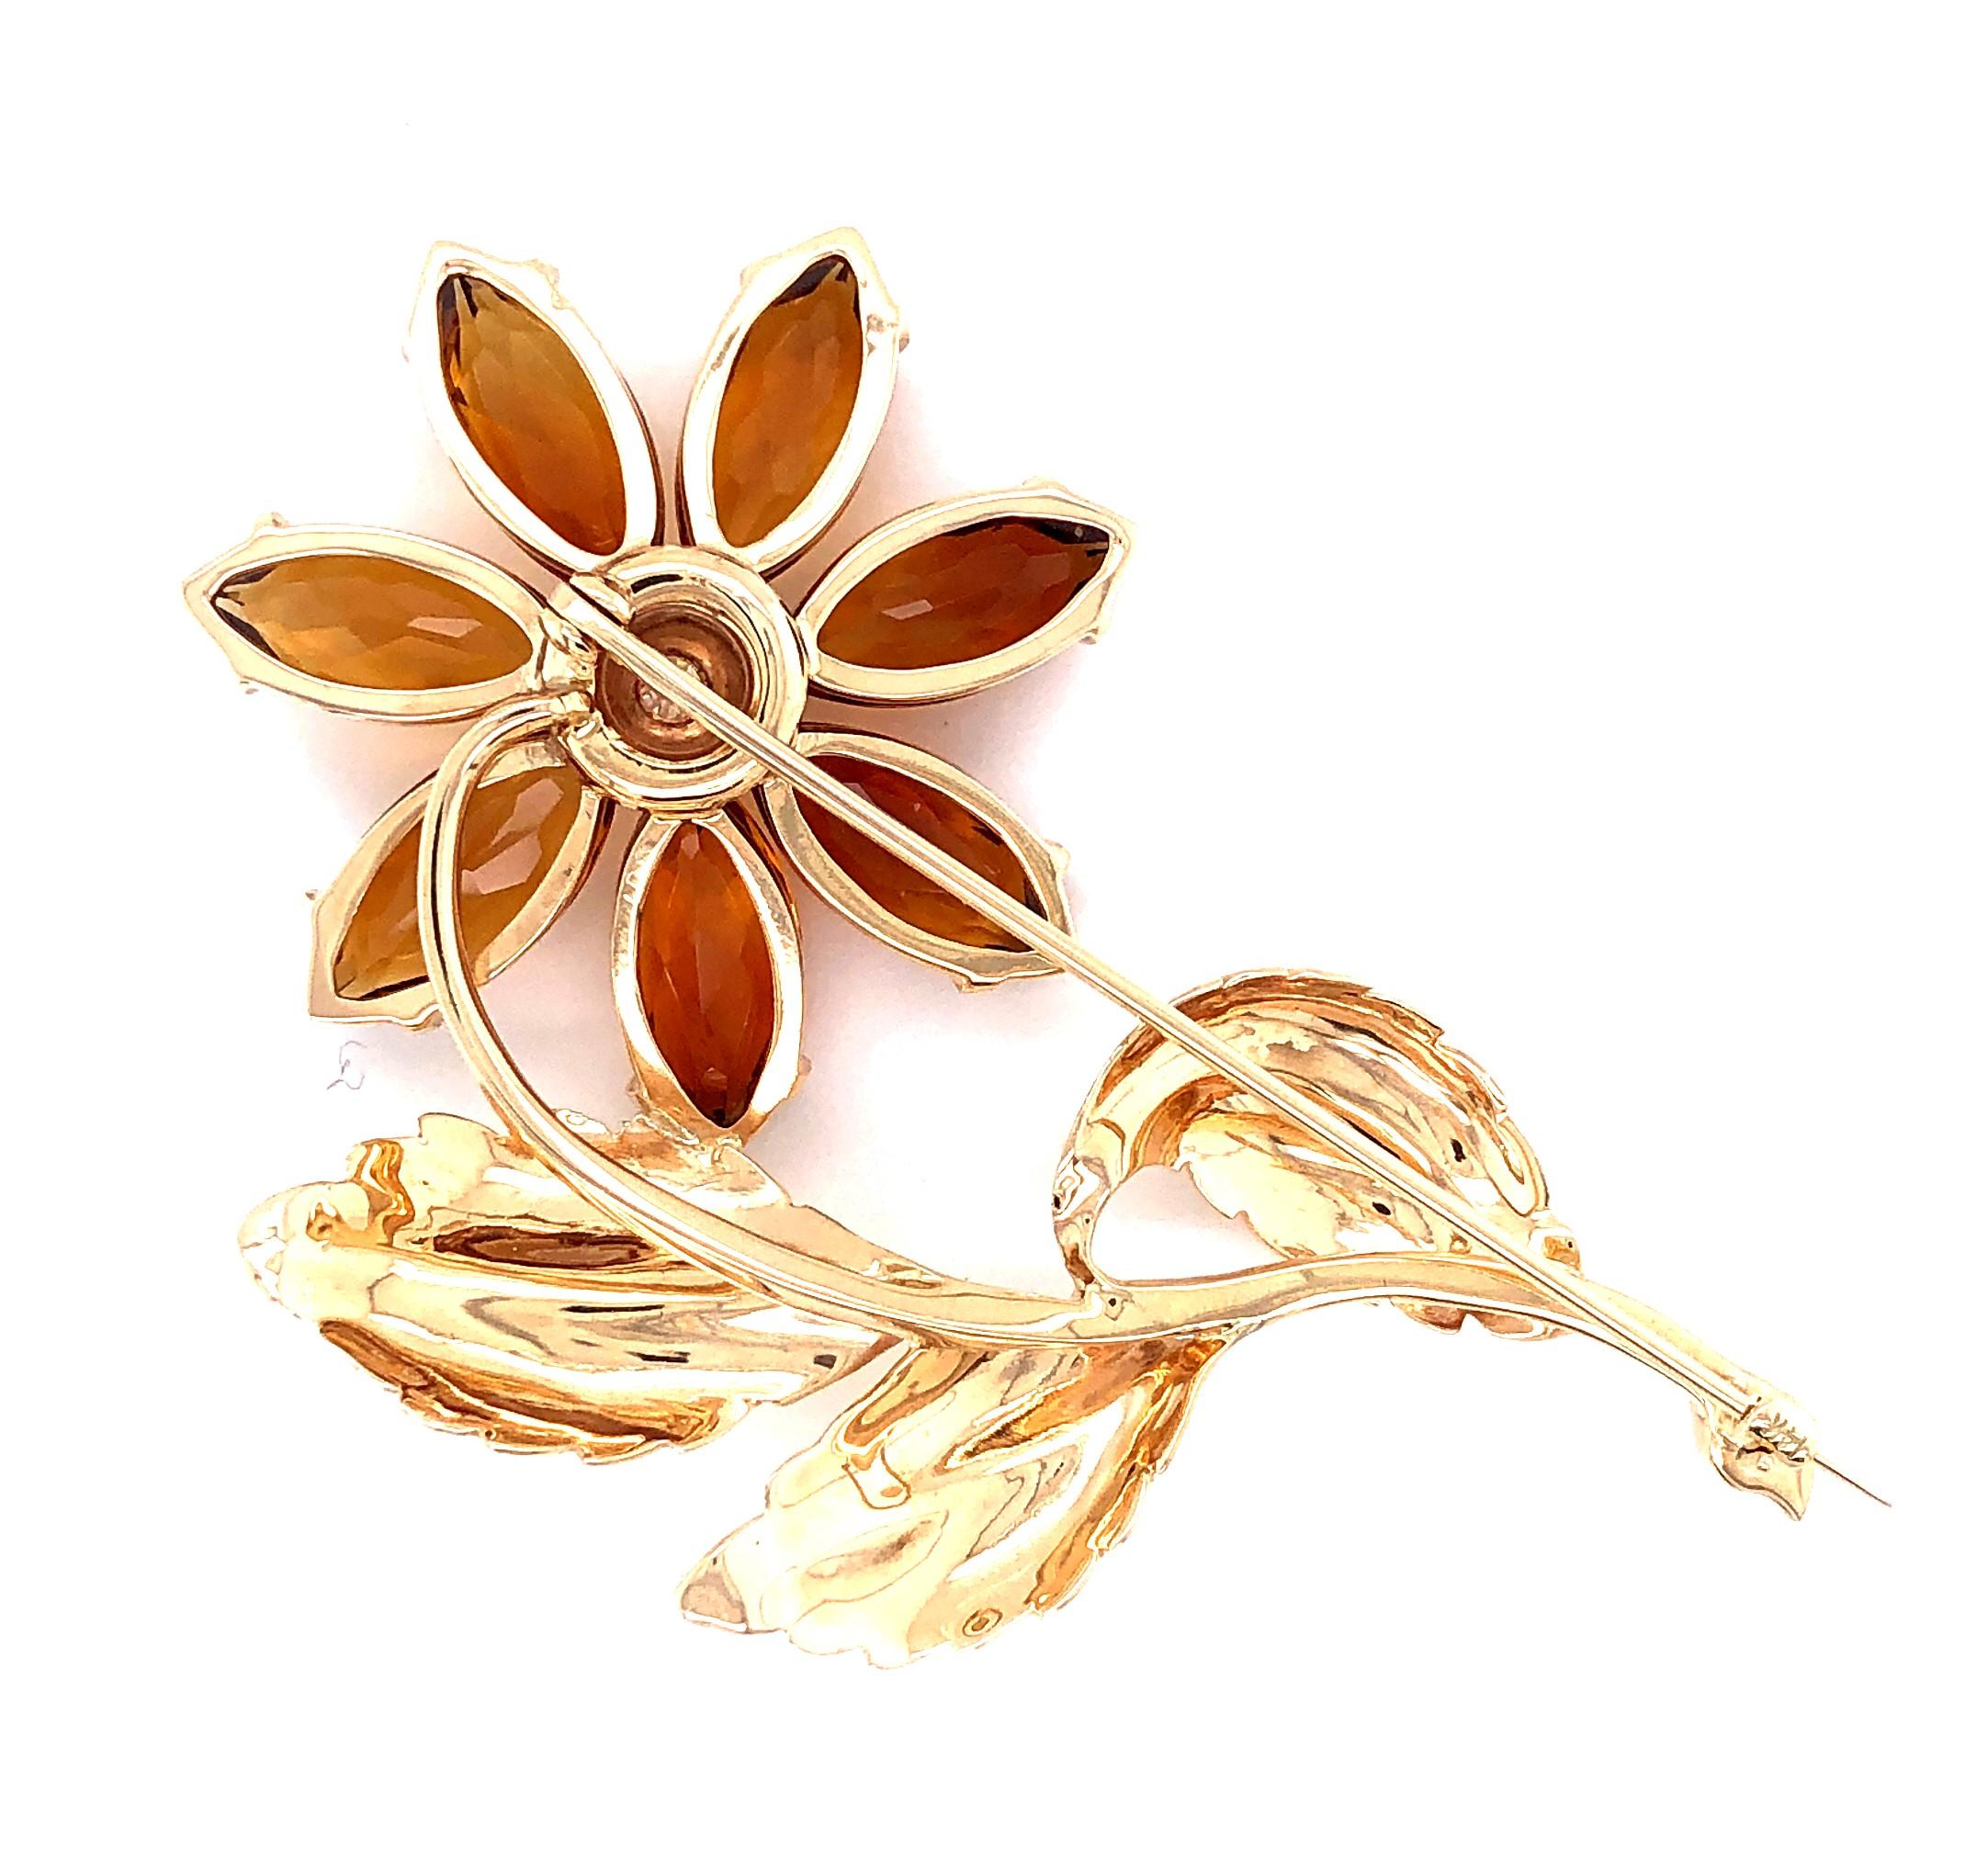 One 14 karat yellow gold brooch set with seven 14.5 x 7mm marquise shaped citrines and one bezel set round brilliant diamond, approximately 0.07 carat with H/I color and SI1/SI2 clarity.  